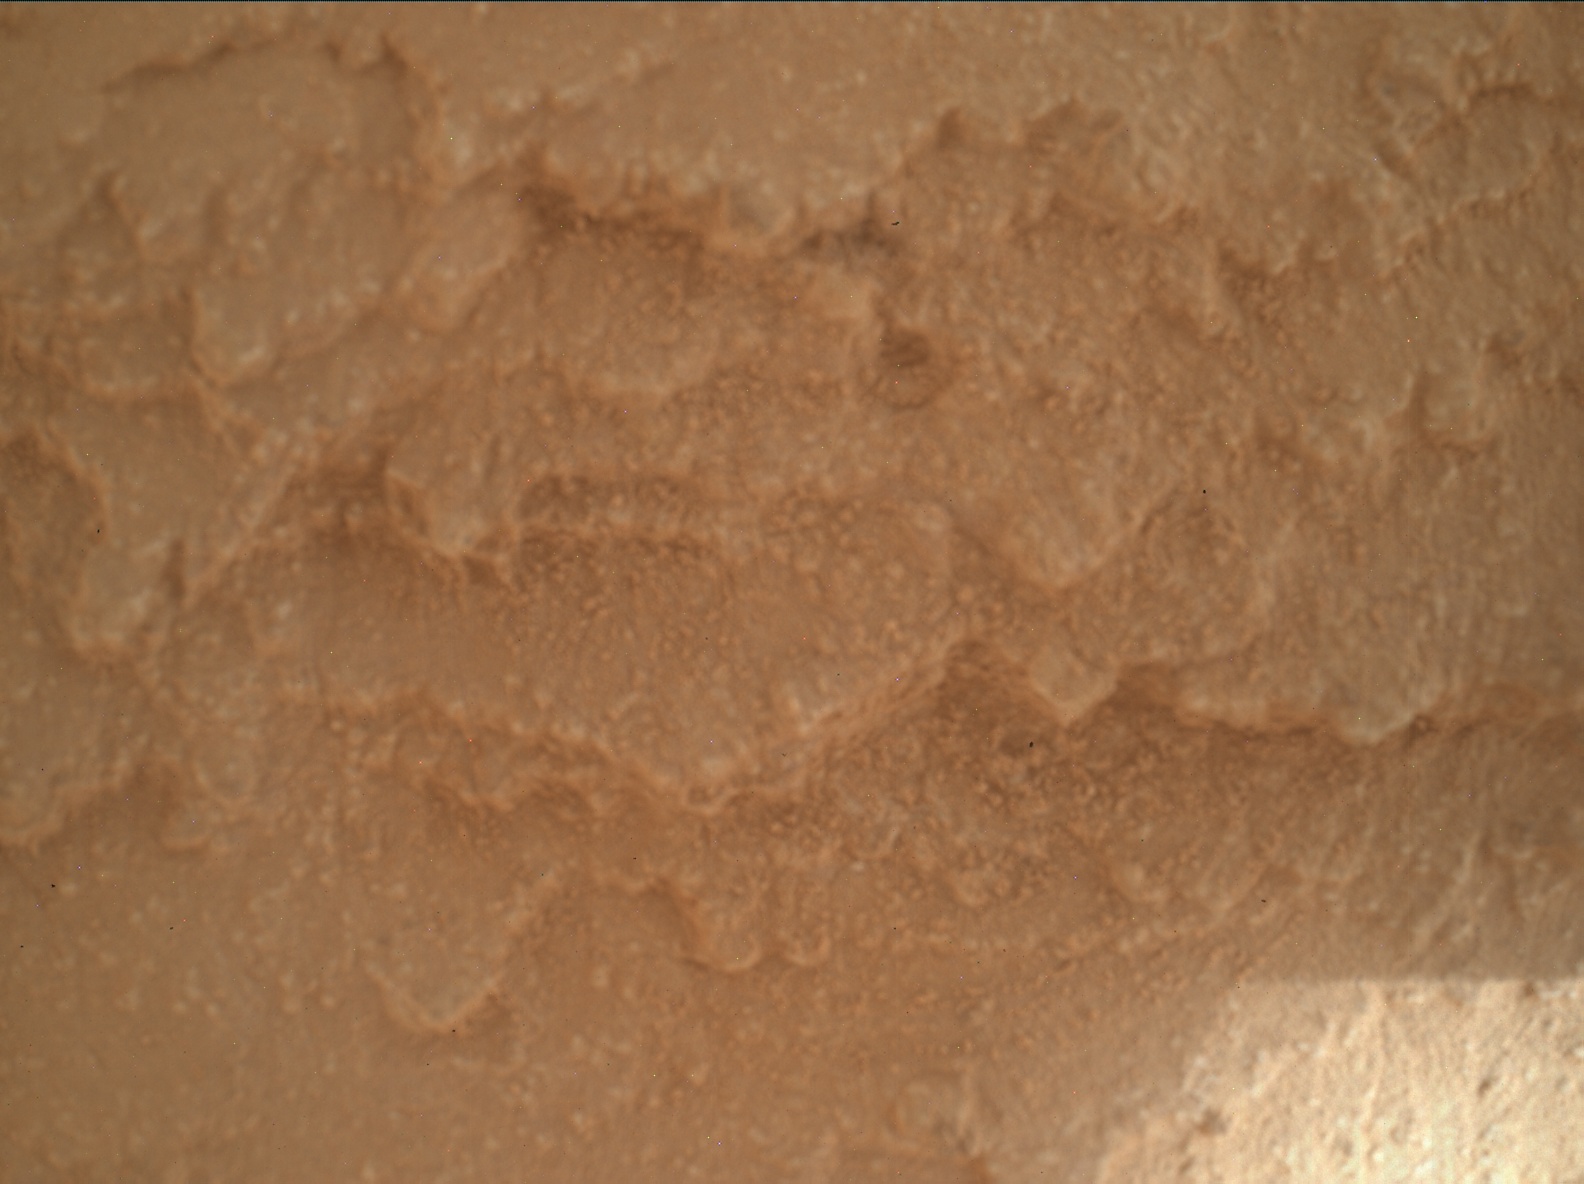 Nasa's Mars rover Curiosity acquired this image using its Mars Hand Lens Imager (MAHLI) on Sol 3837